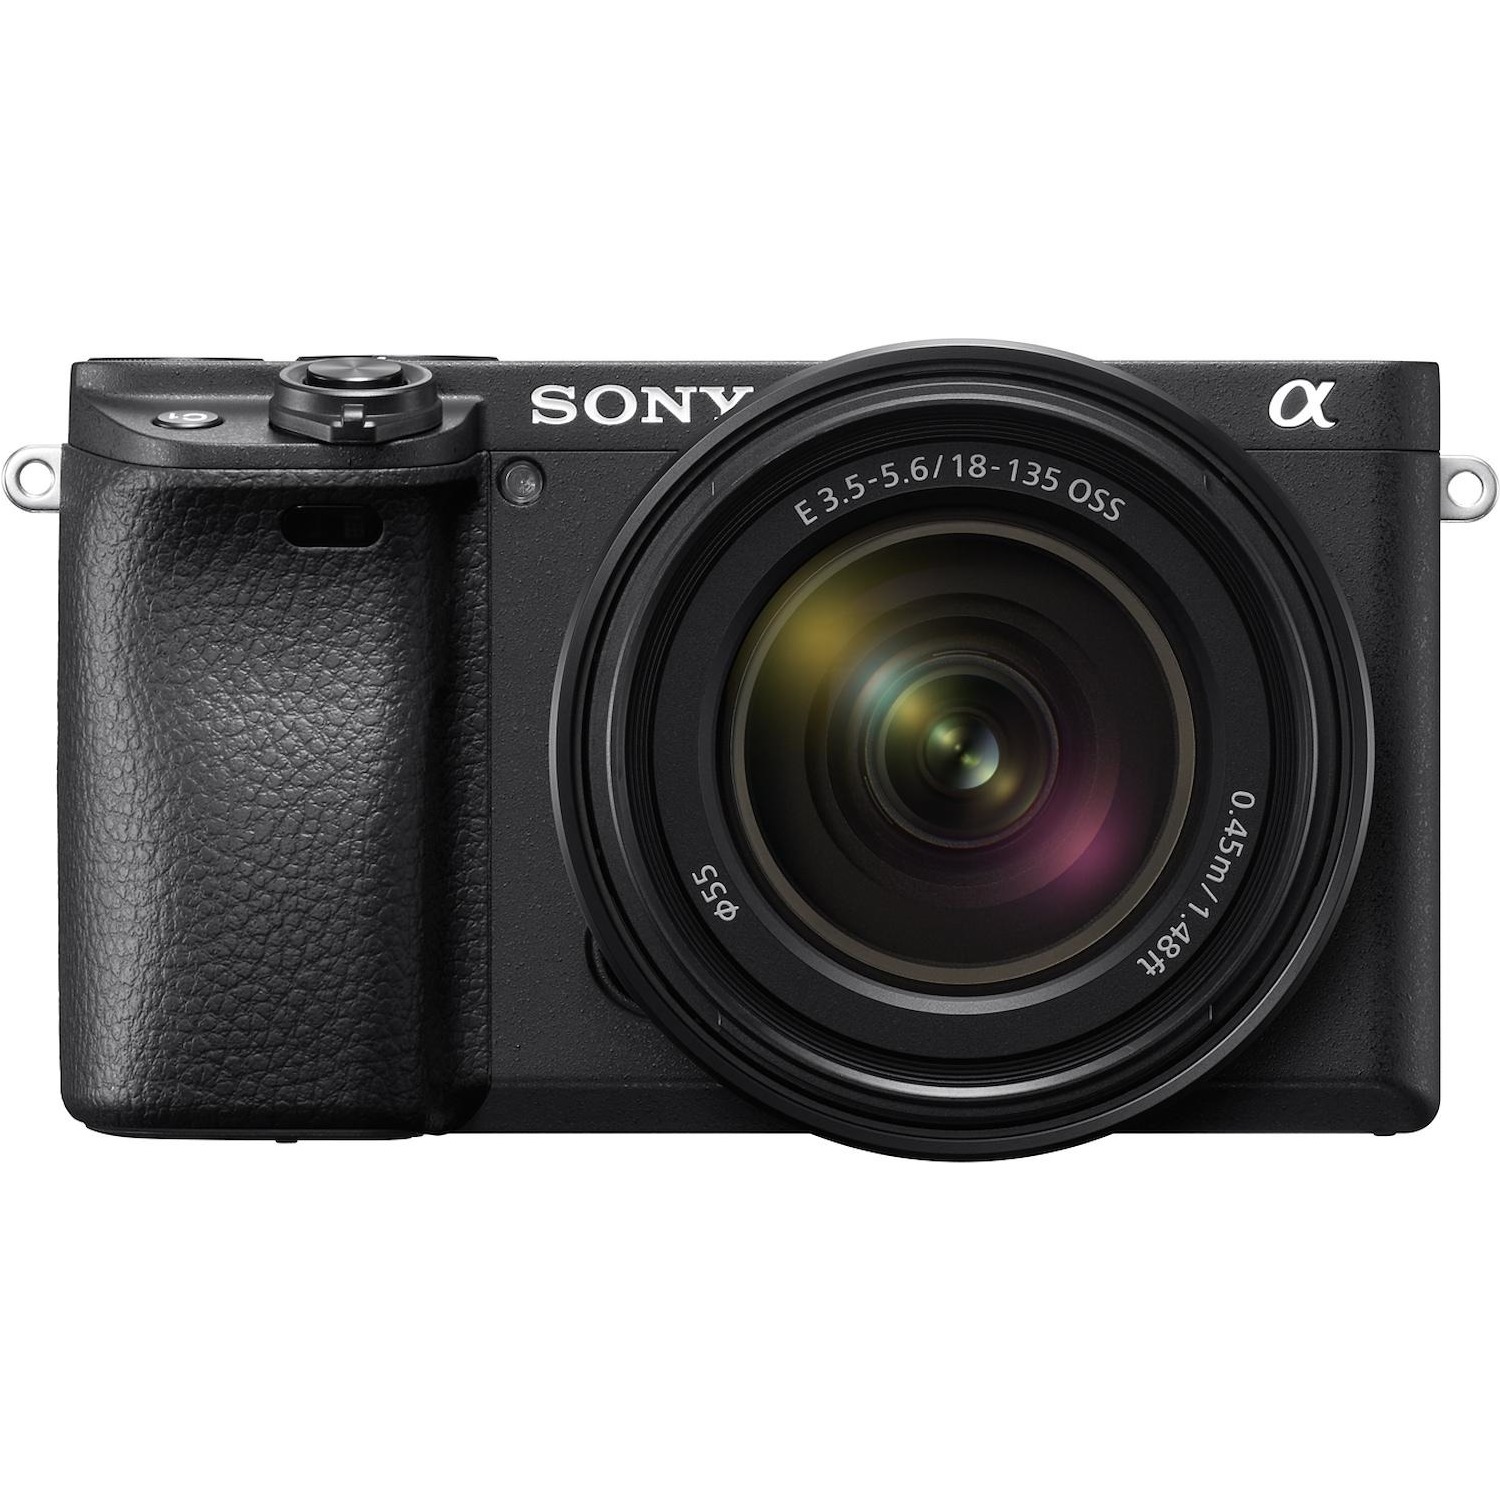 Image of Sony α Alpha 6400 con obiettivo 16-50mm, mirrorless APS-C con Real-Time Eye AF